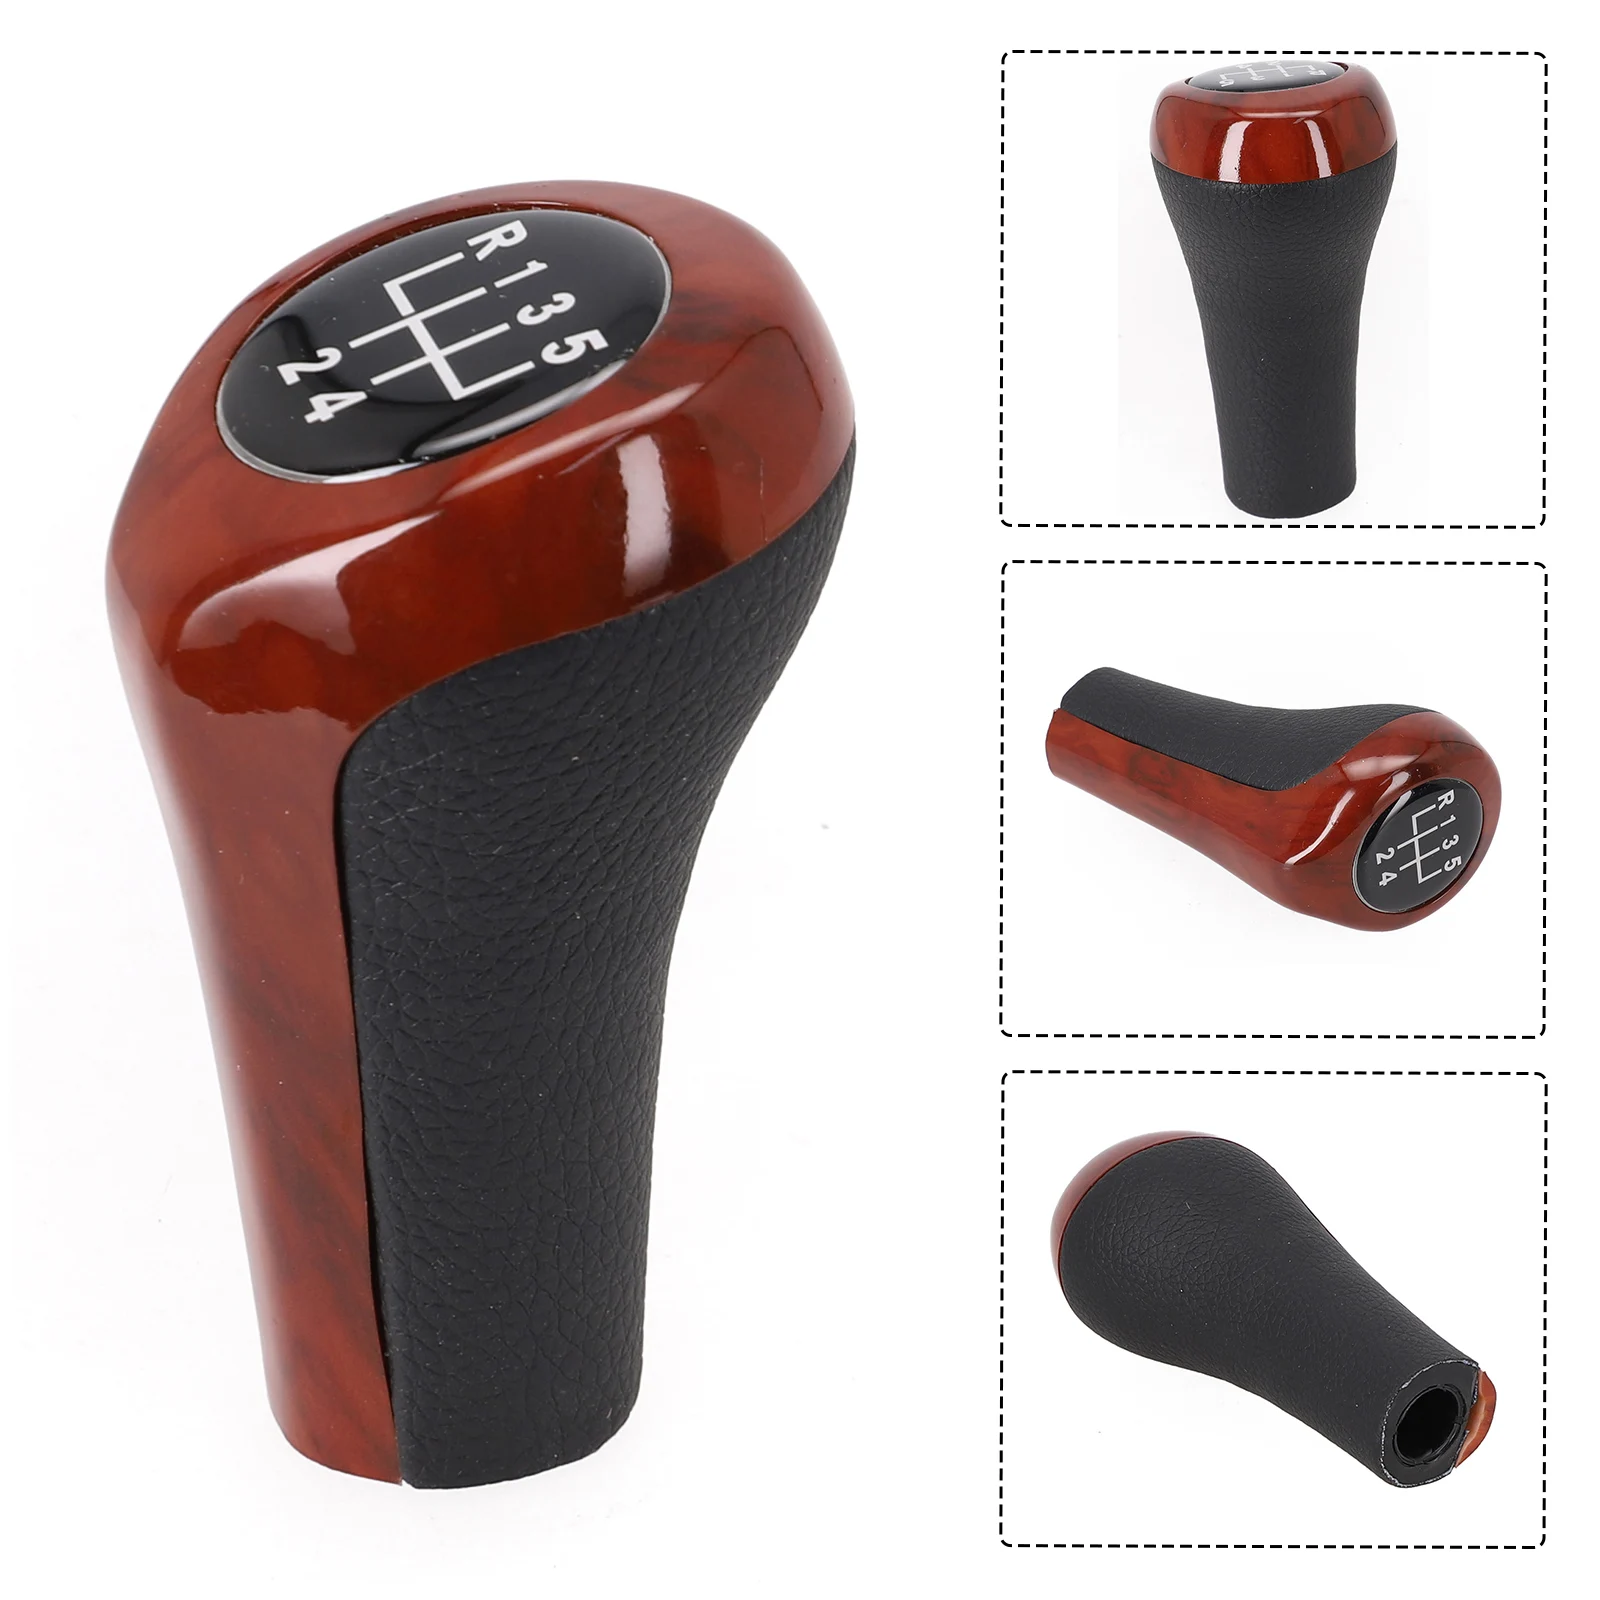 

5/6 Speed Gear Shift Knob Wood Grain Leather For BMW E30 E36 E46 E39 E34 Z3 E53 Wood Grain Leather Shifter Head Part